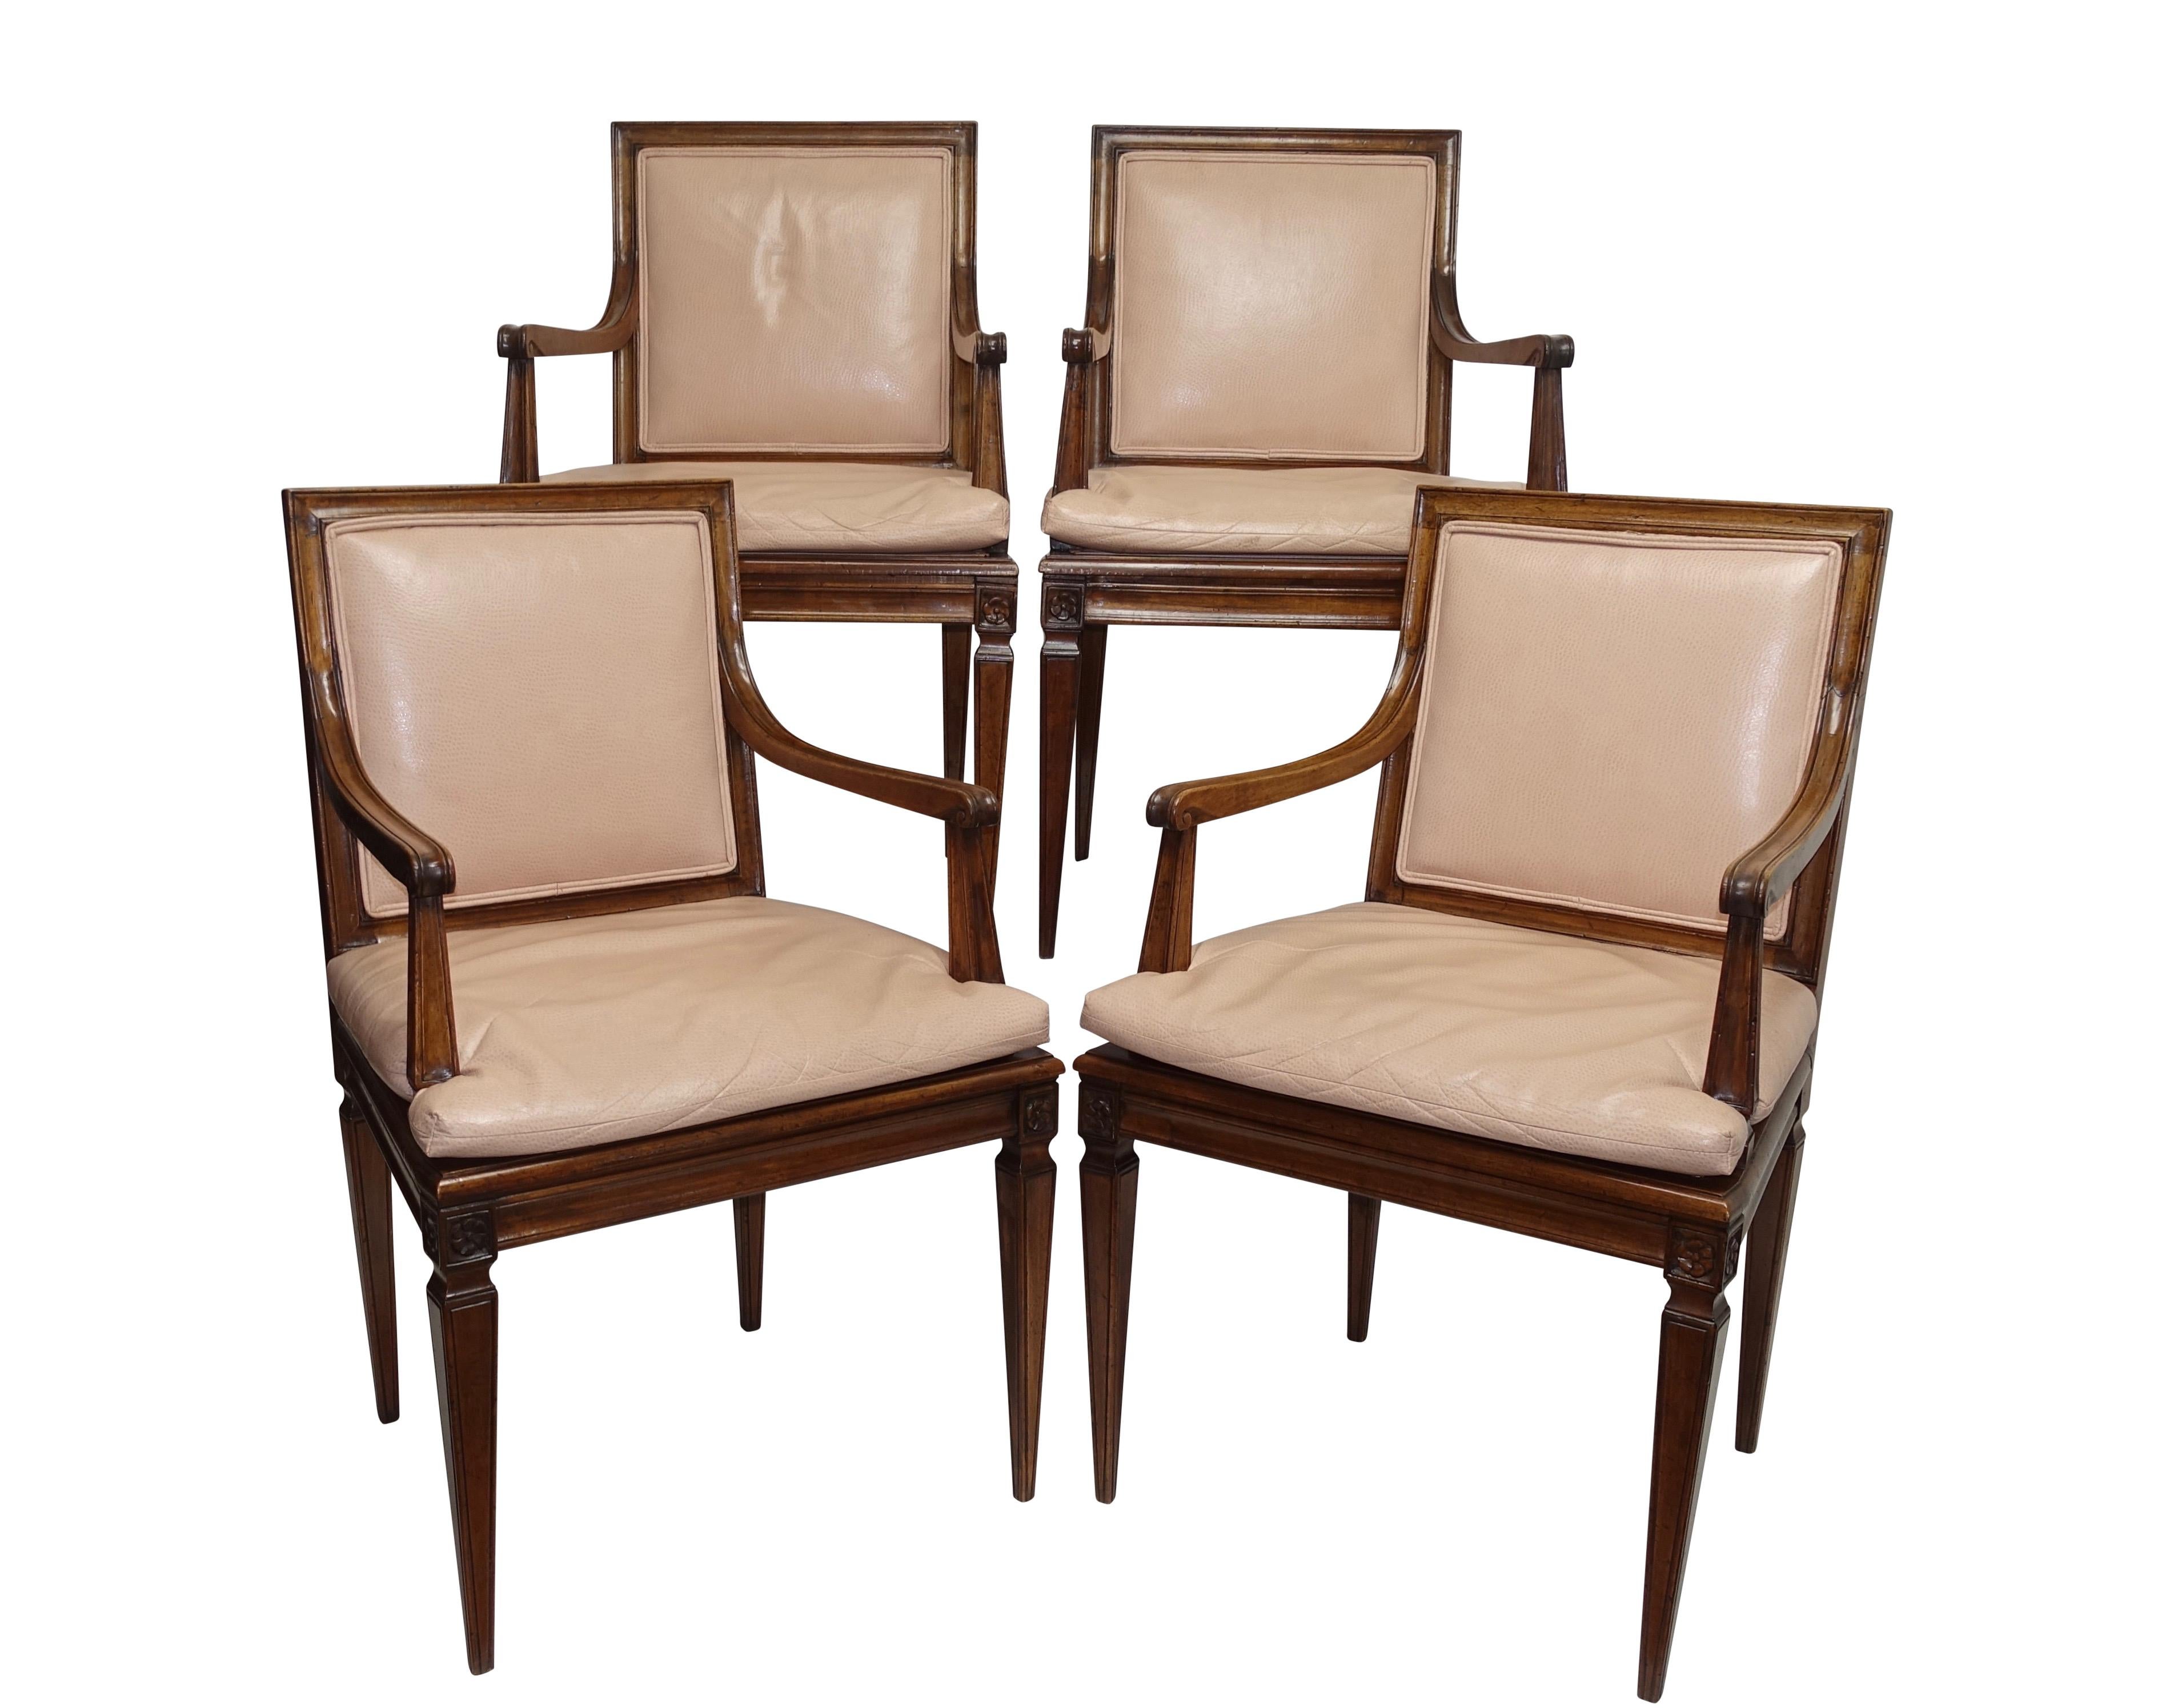 Set of Four Neoclassical Style Armchairs, Italian, Late 19th-Early 20th Century 5